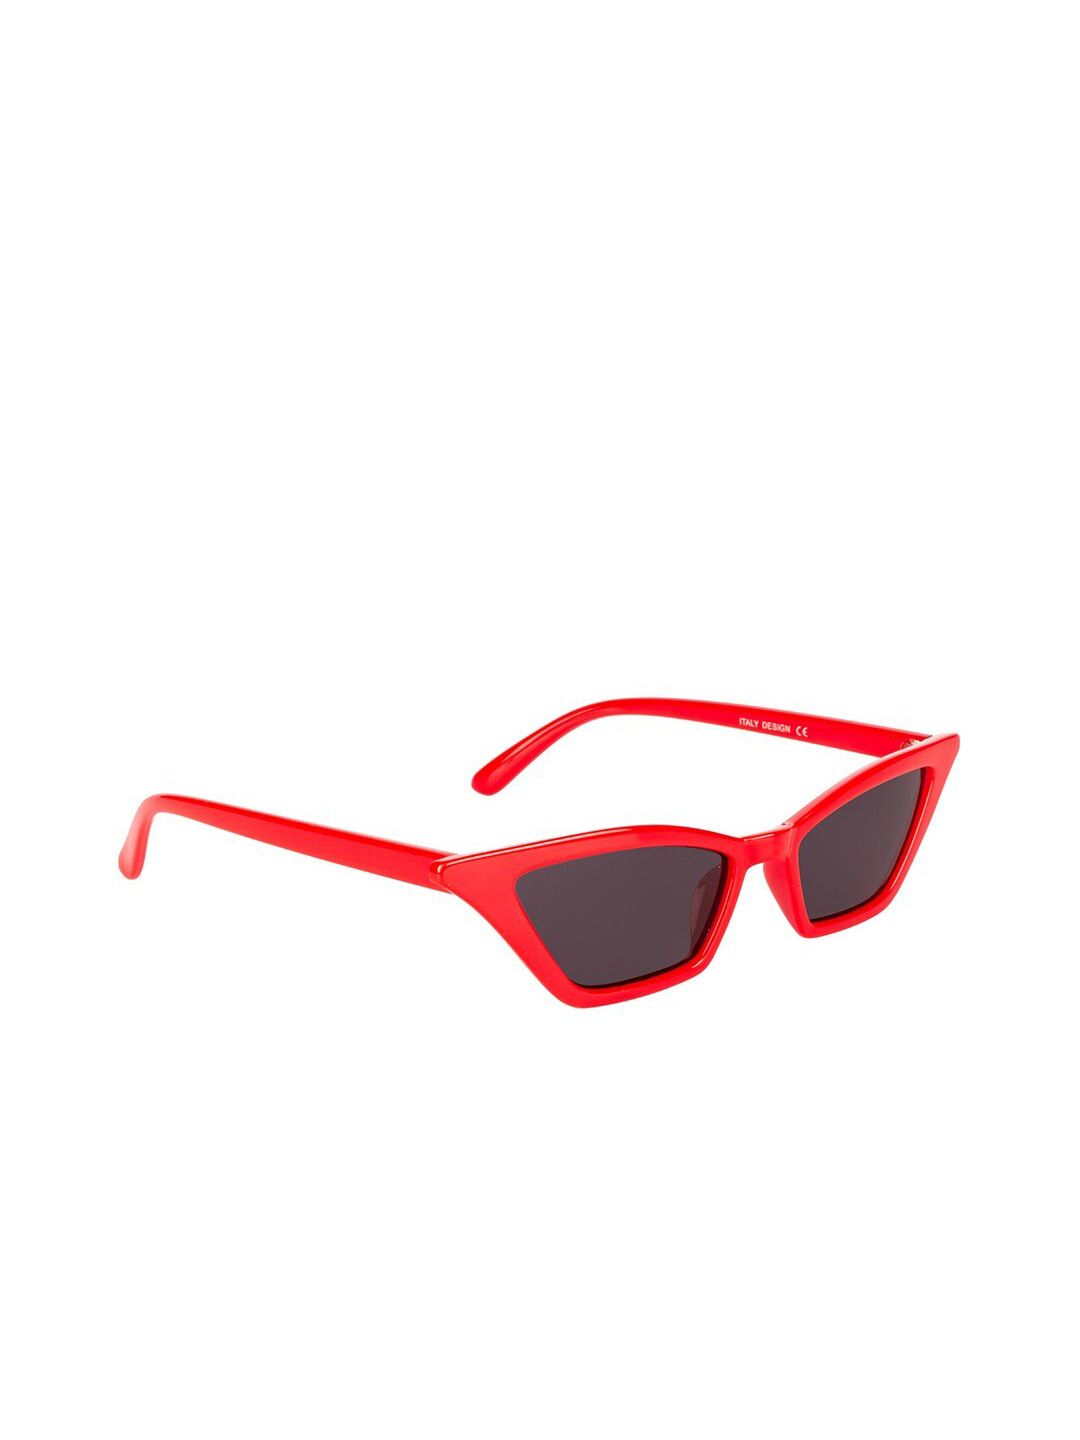 Awestuffs Women Black Lens & Red Cateye Sunglasses with UV Protected Lens Price in India